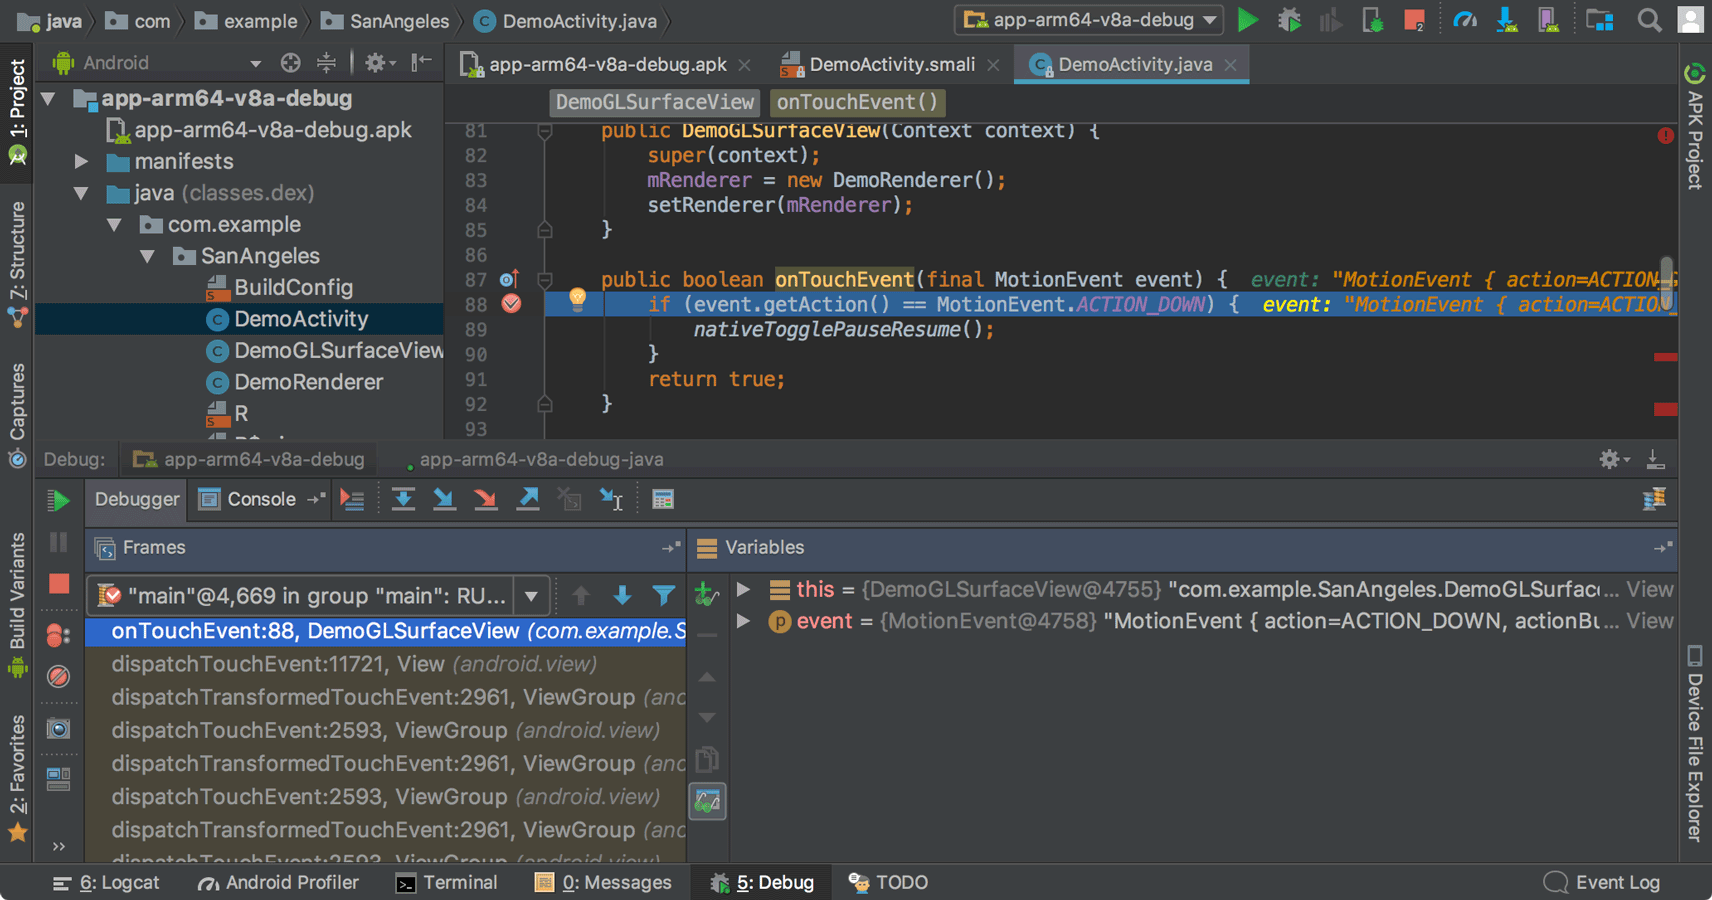 android studio databases